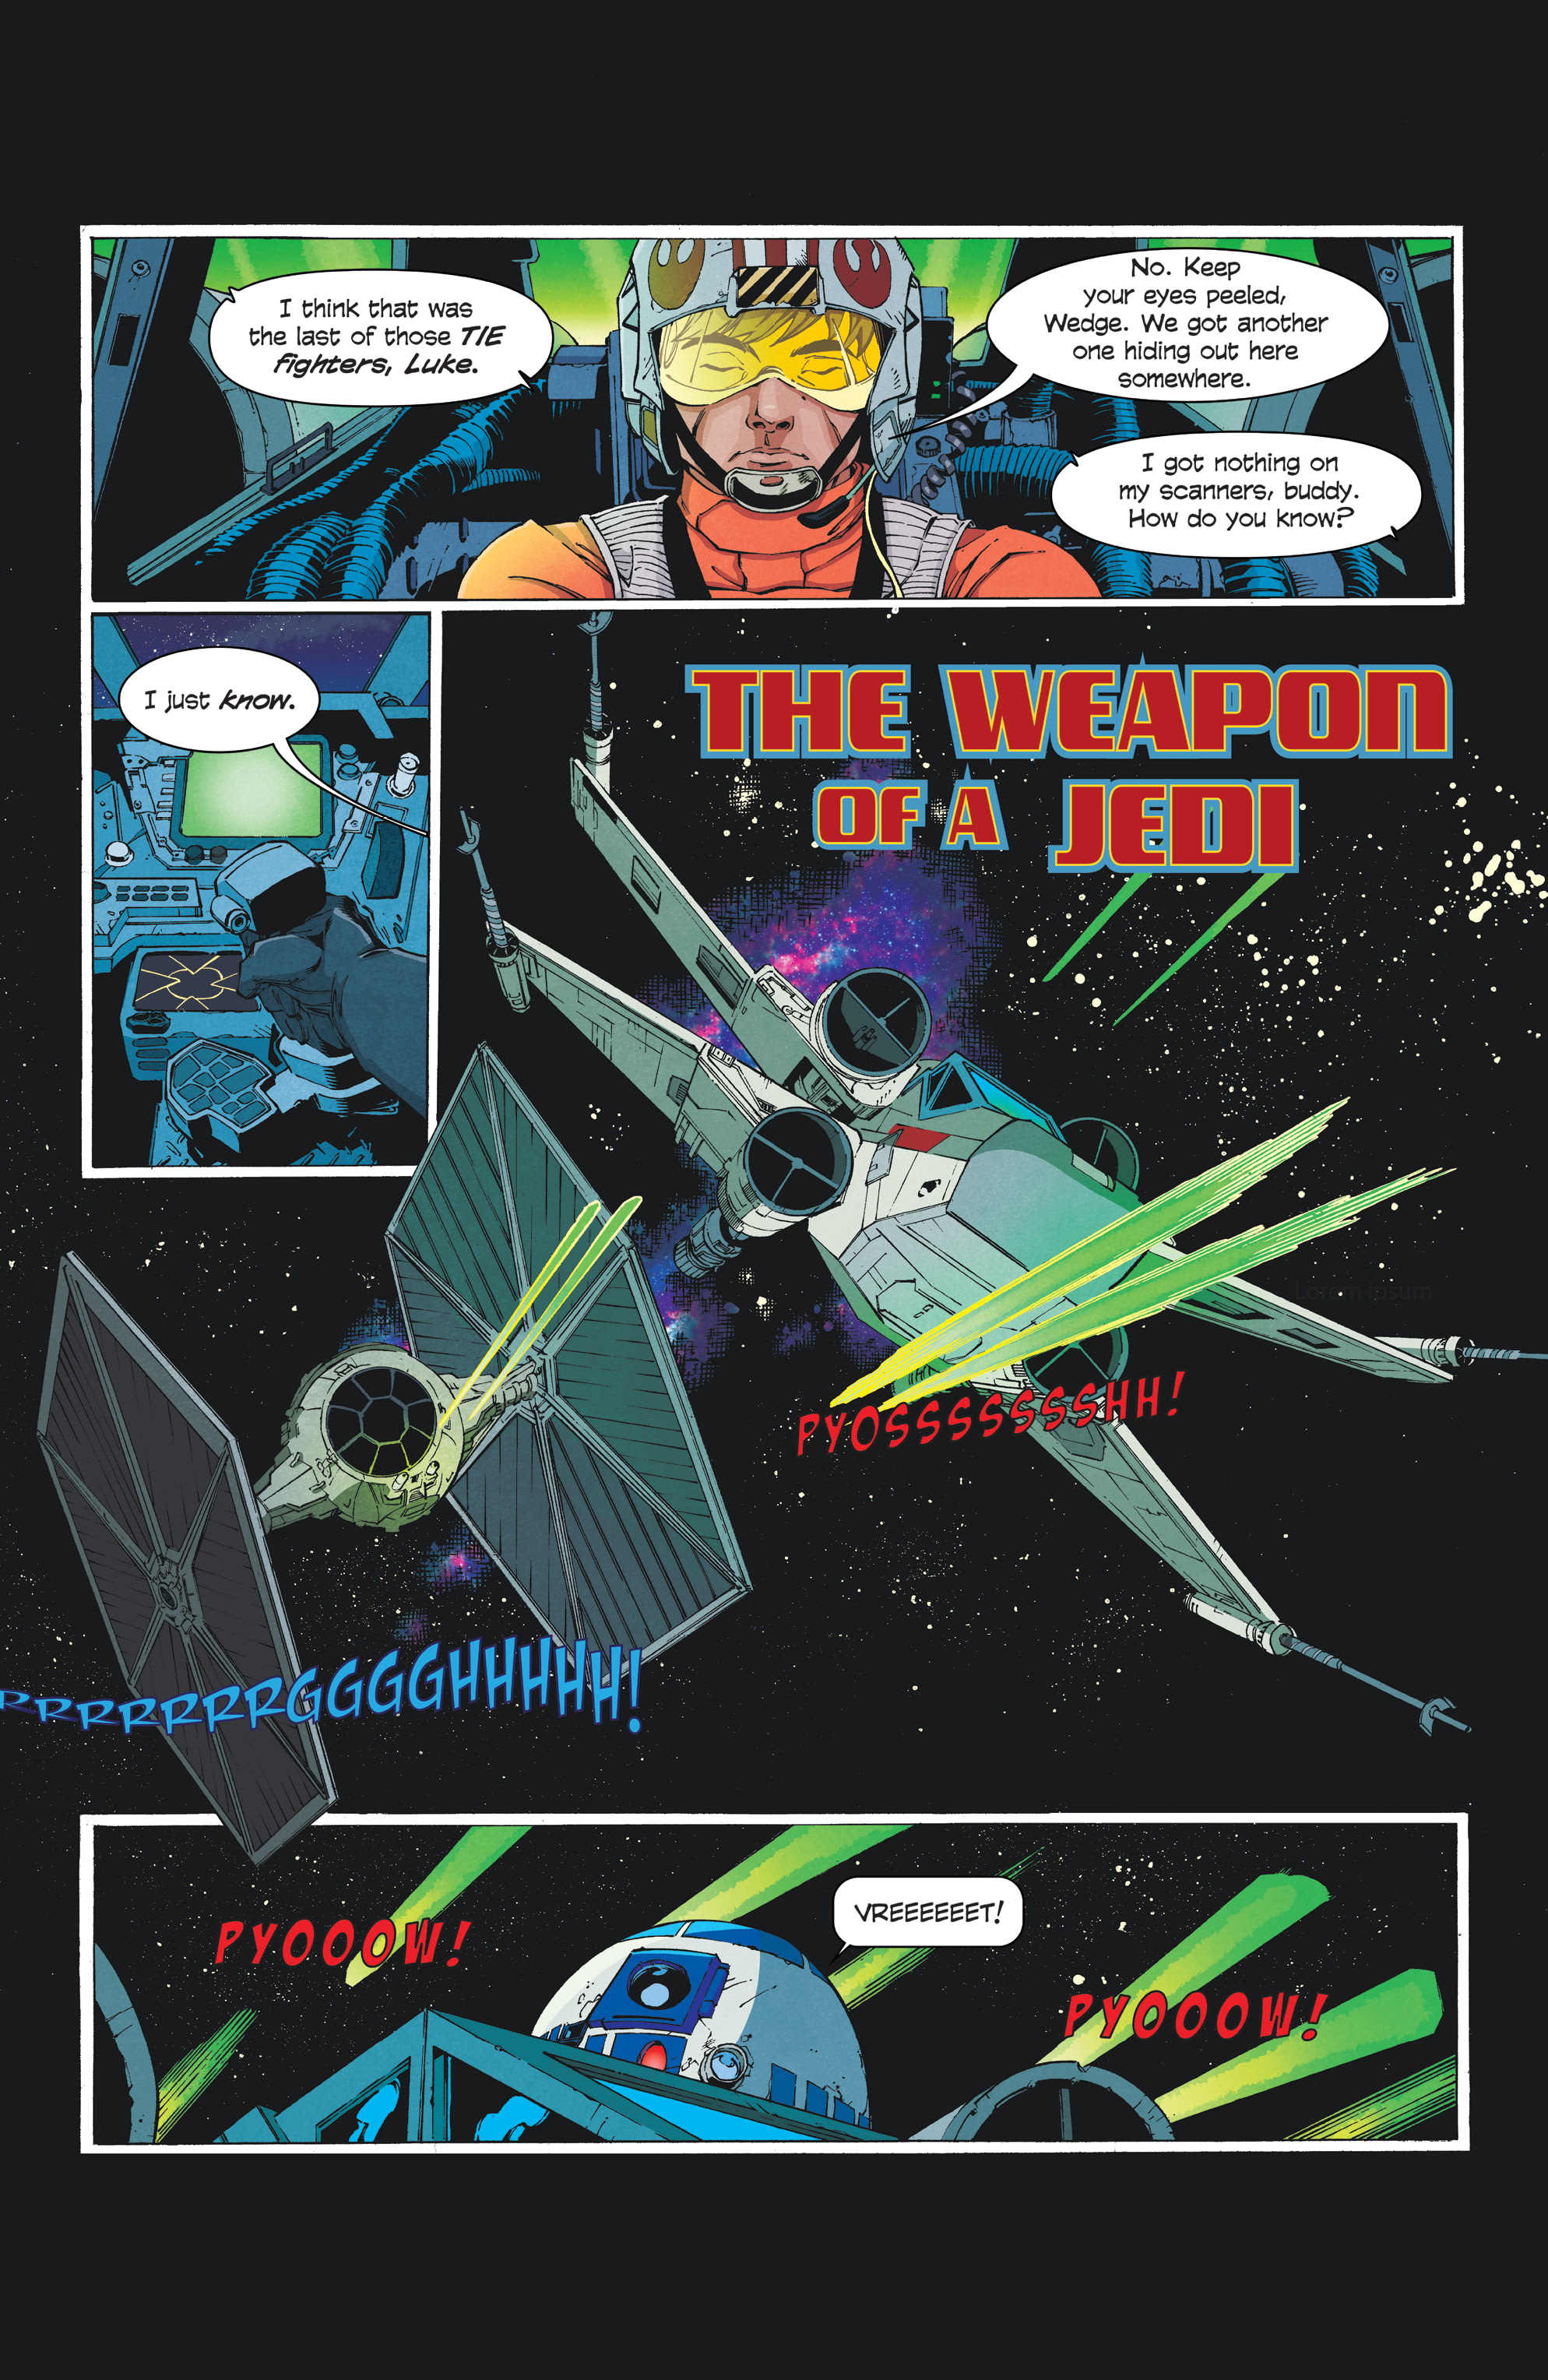 Star Wars Adventures: Weapon of a Jedi (2021): Chapter 1 - Page 3